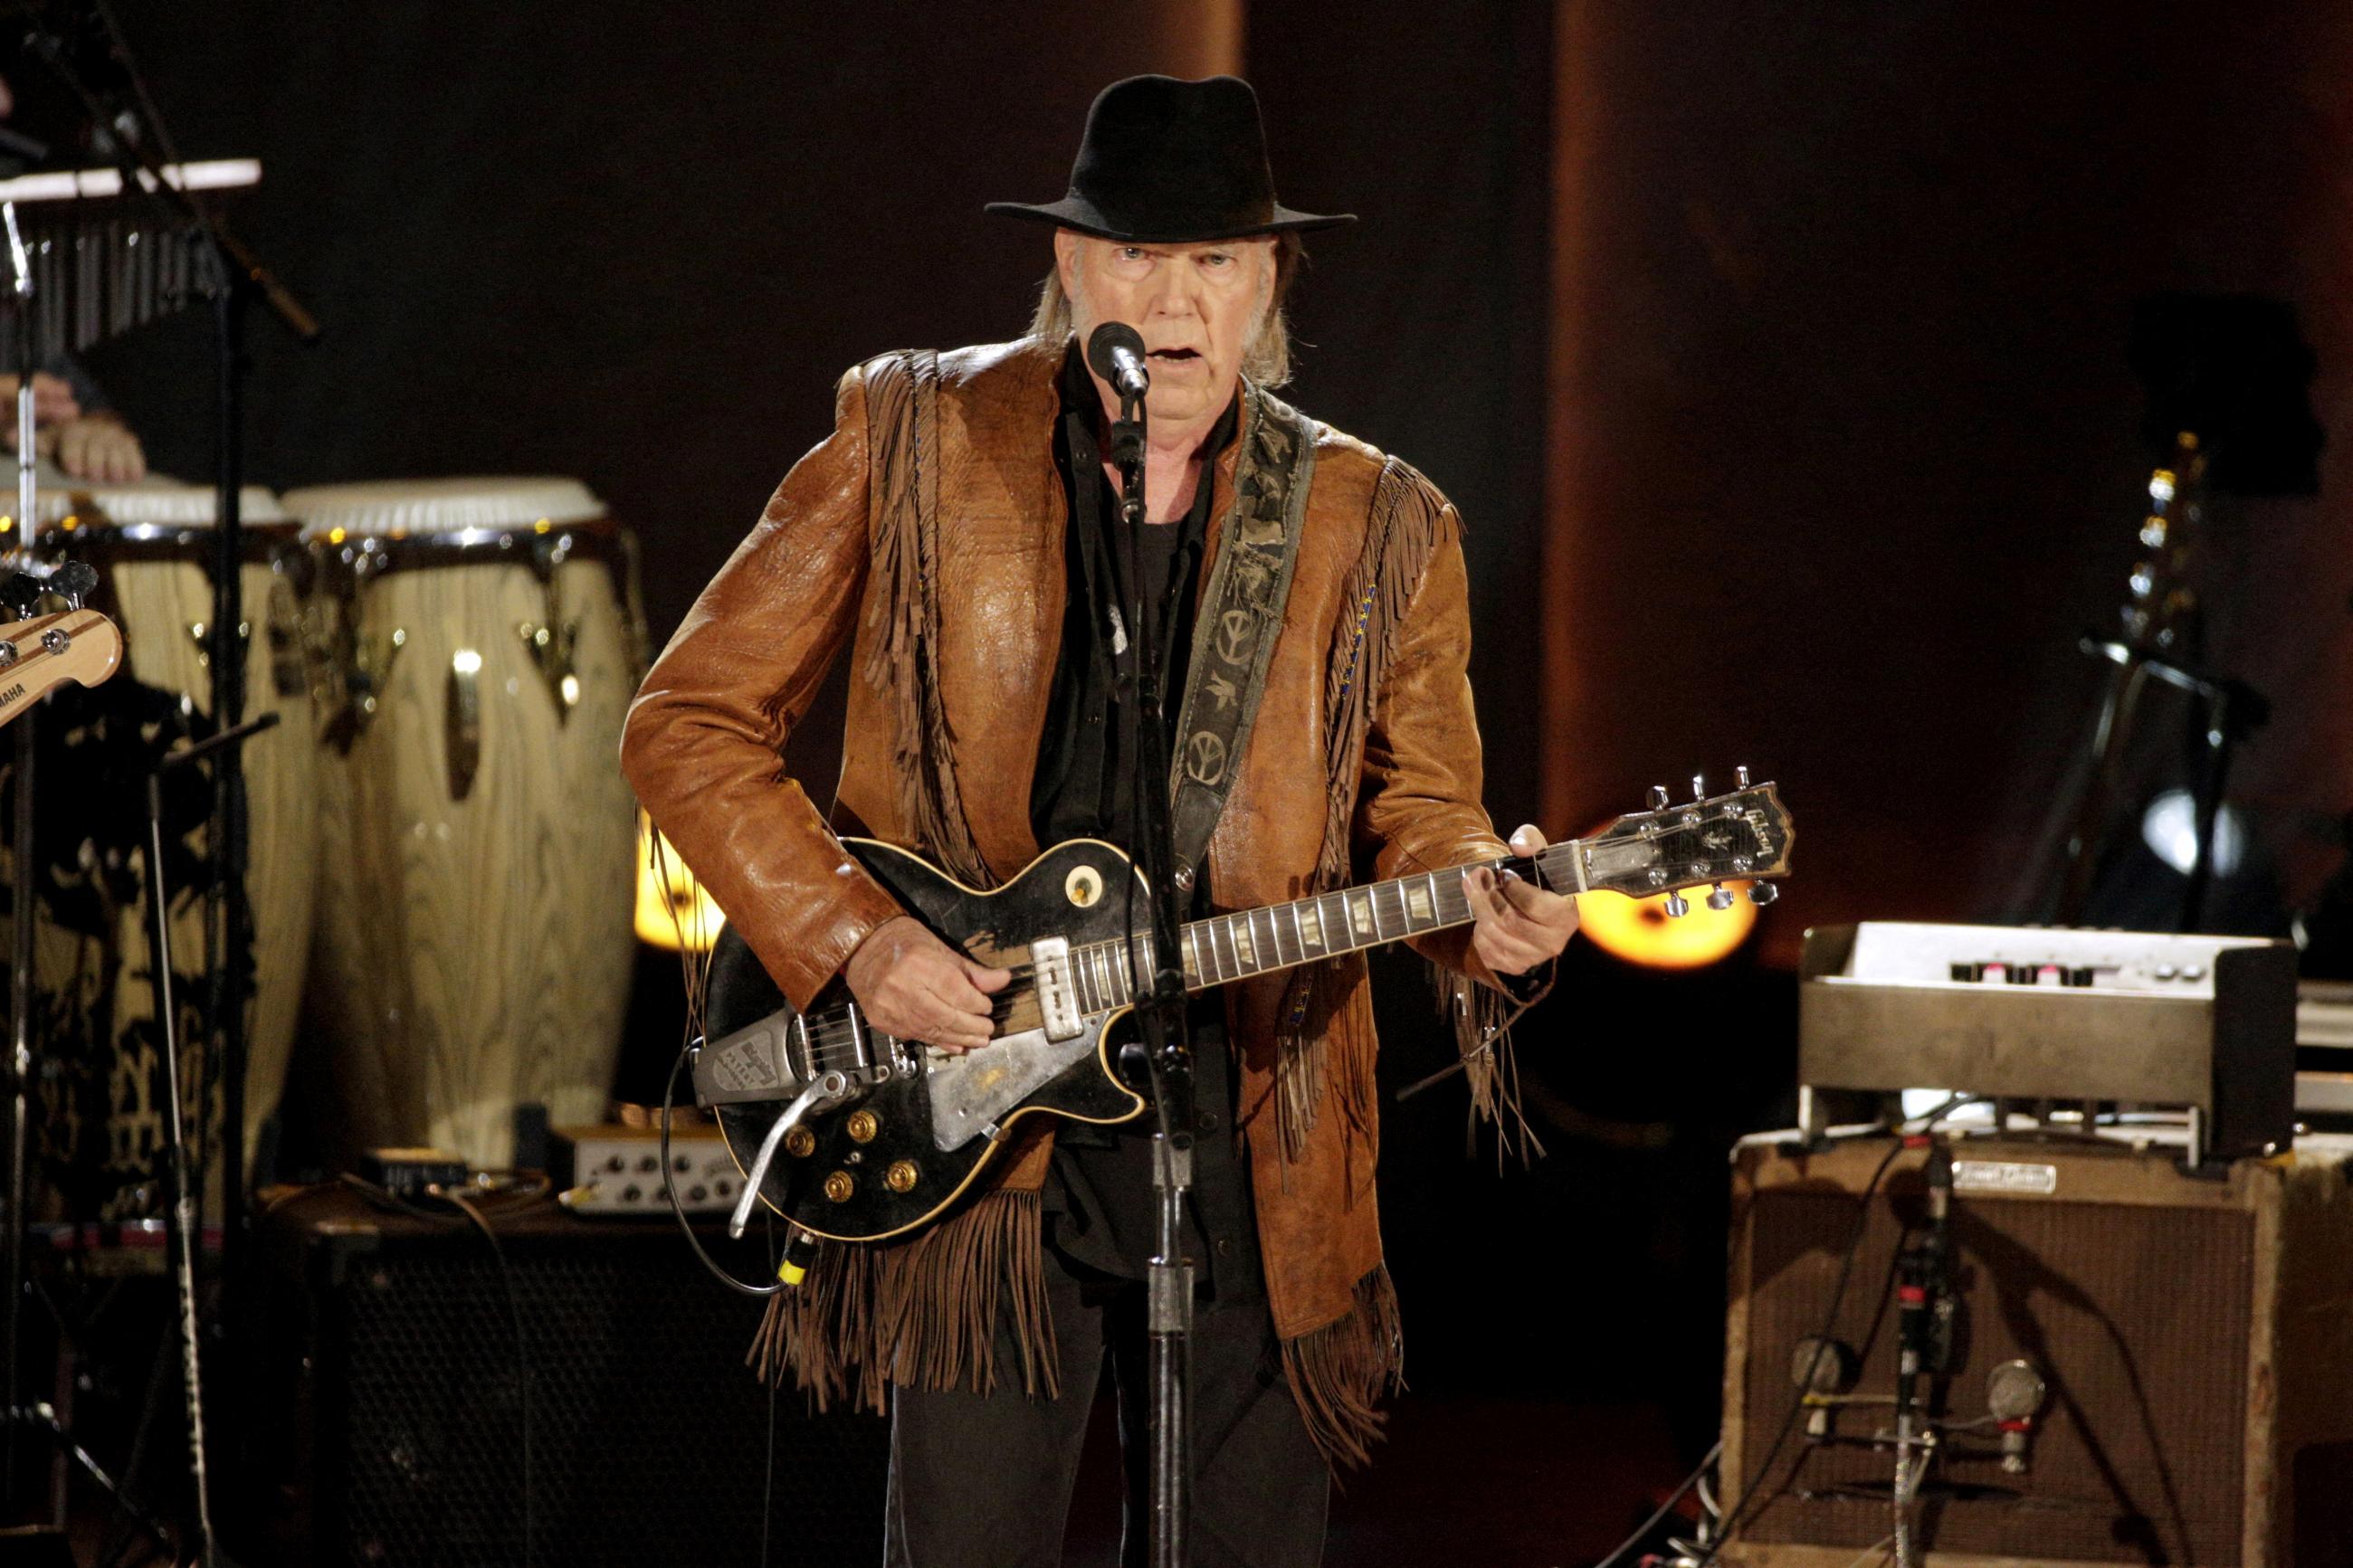 Singer-songwriter Neil Young plays guitar on a stage wearing a fringed jacket and black hat.